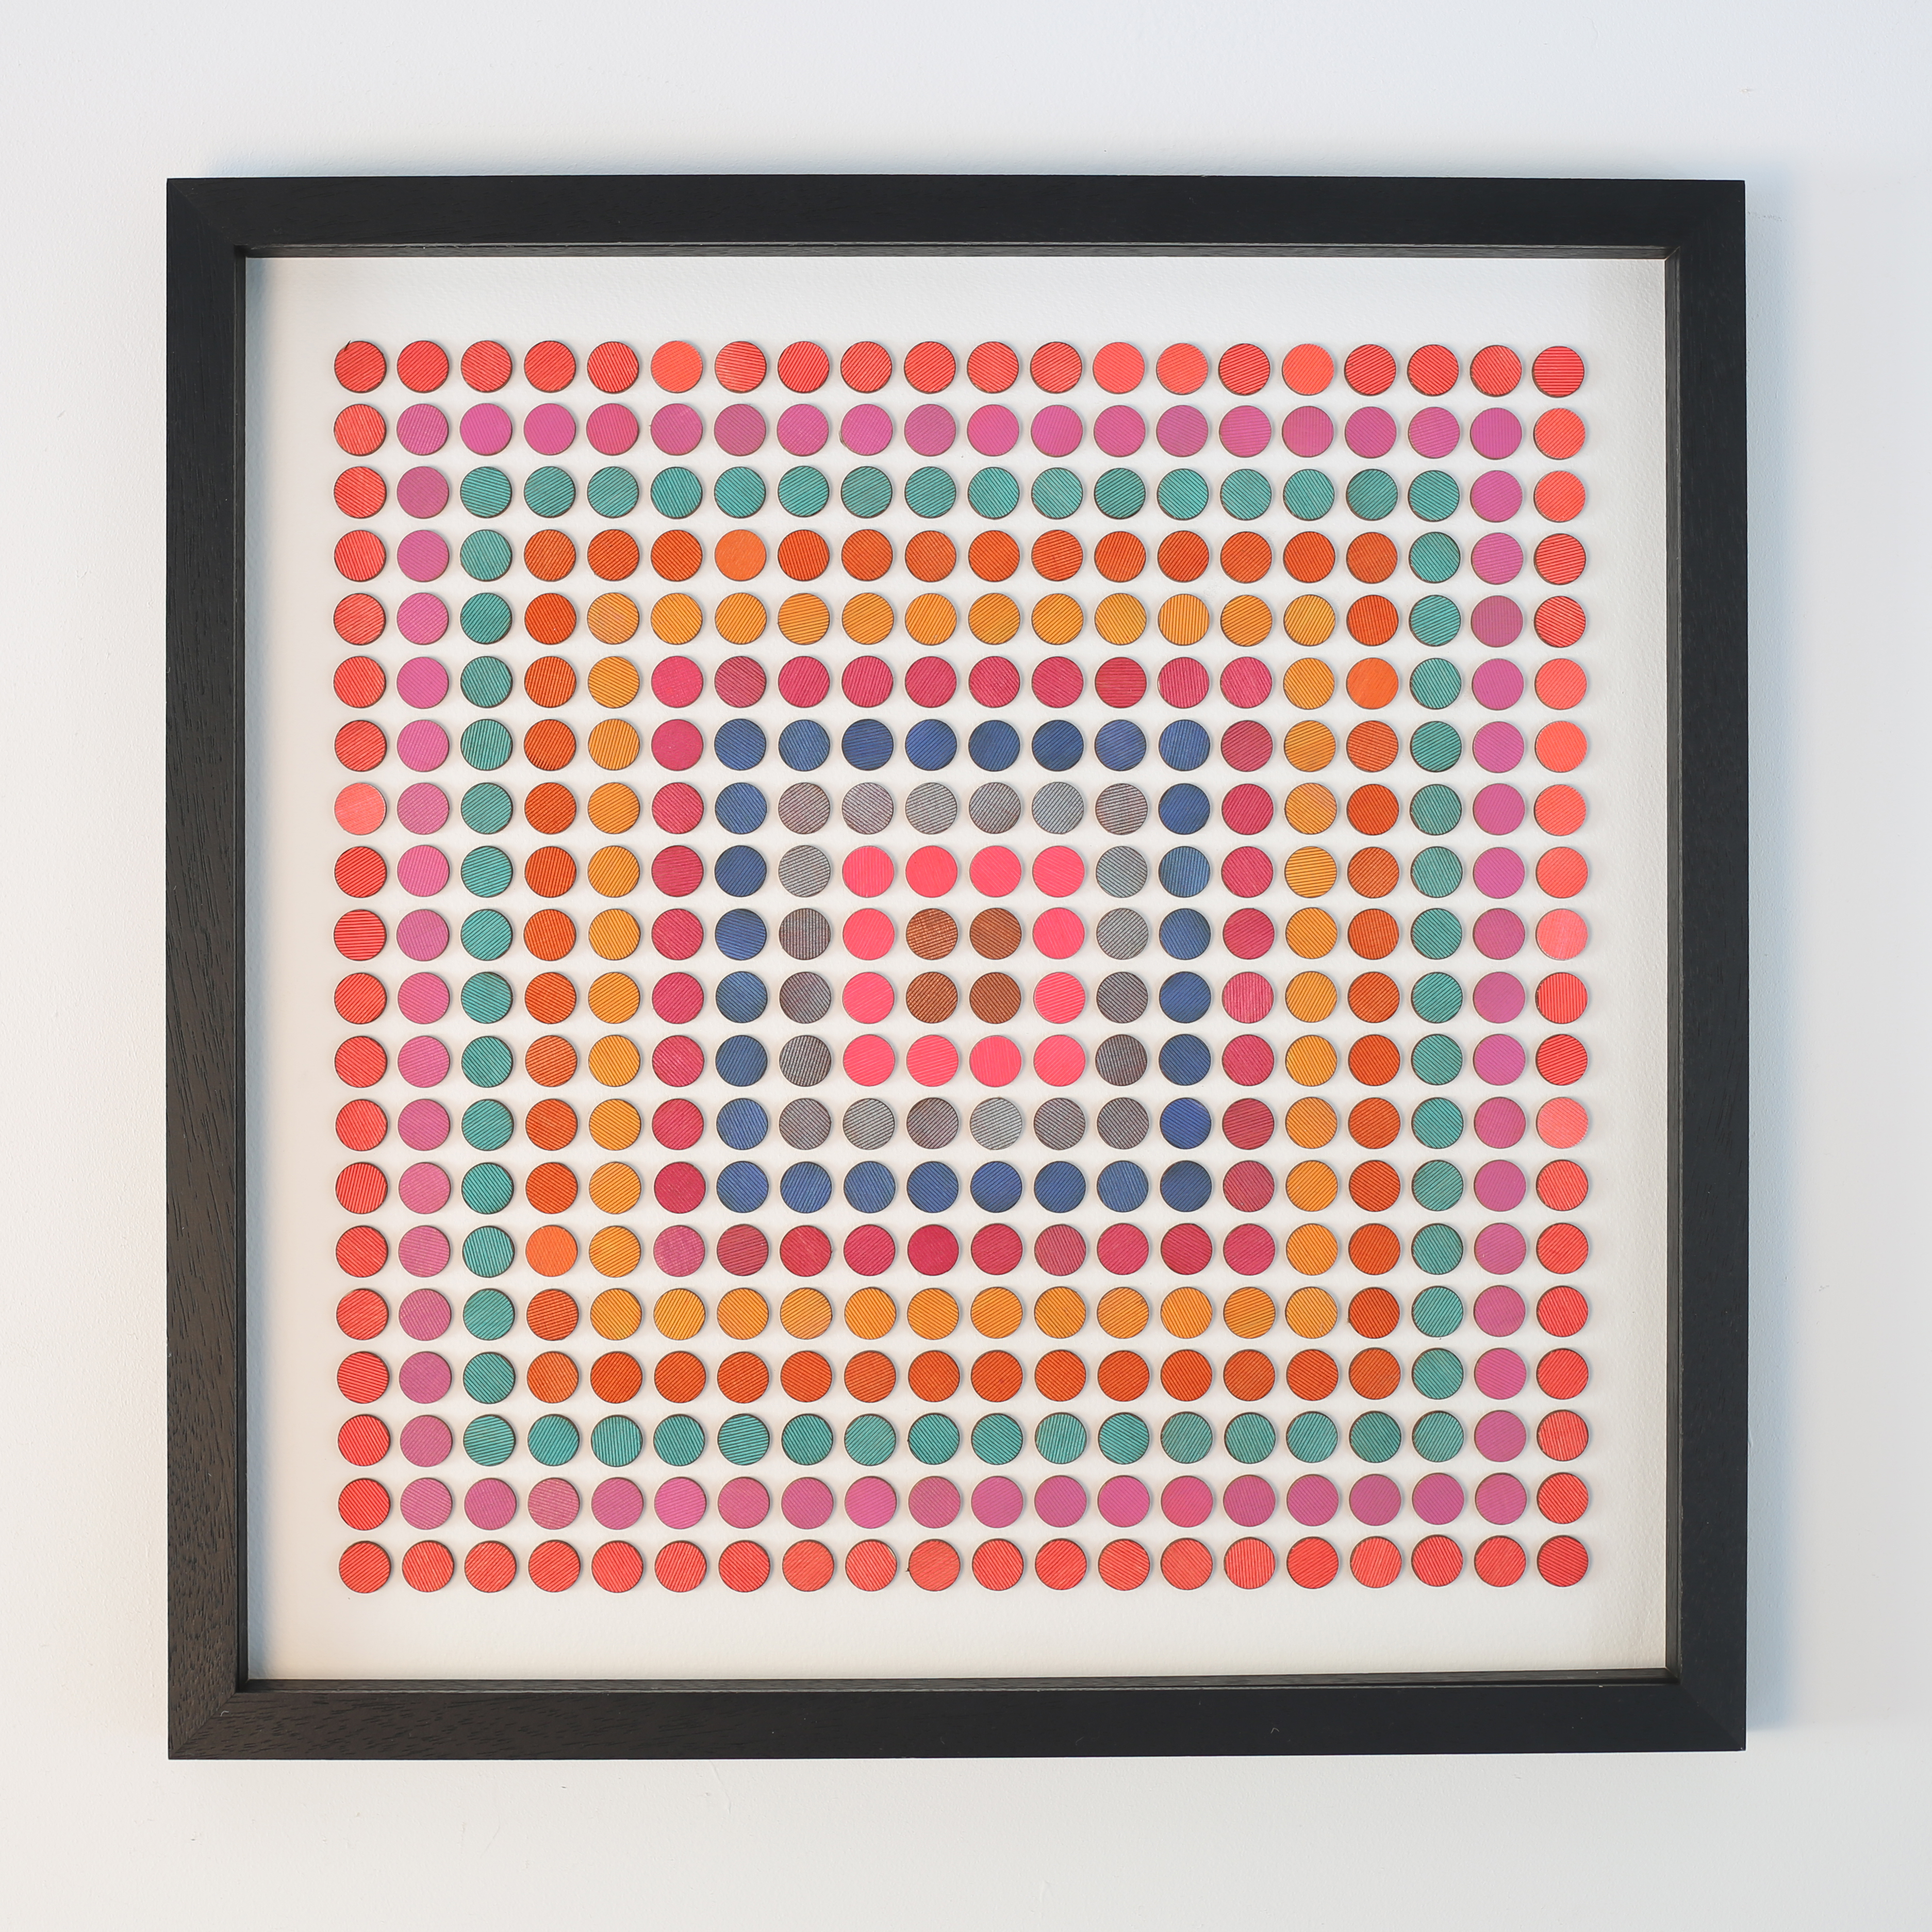 Amelia Coward, Concentric dots red, The Auction Collective